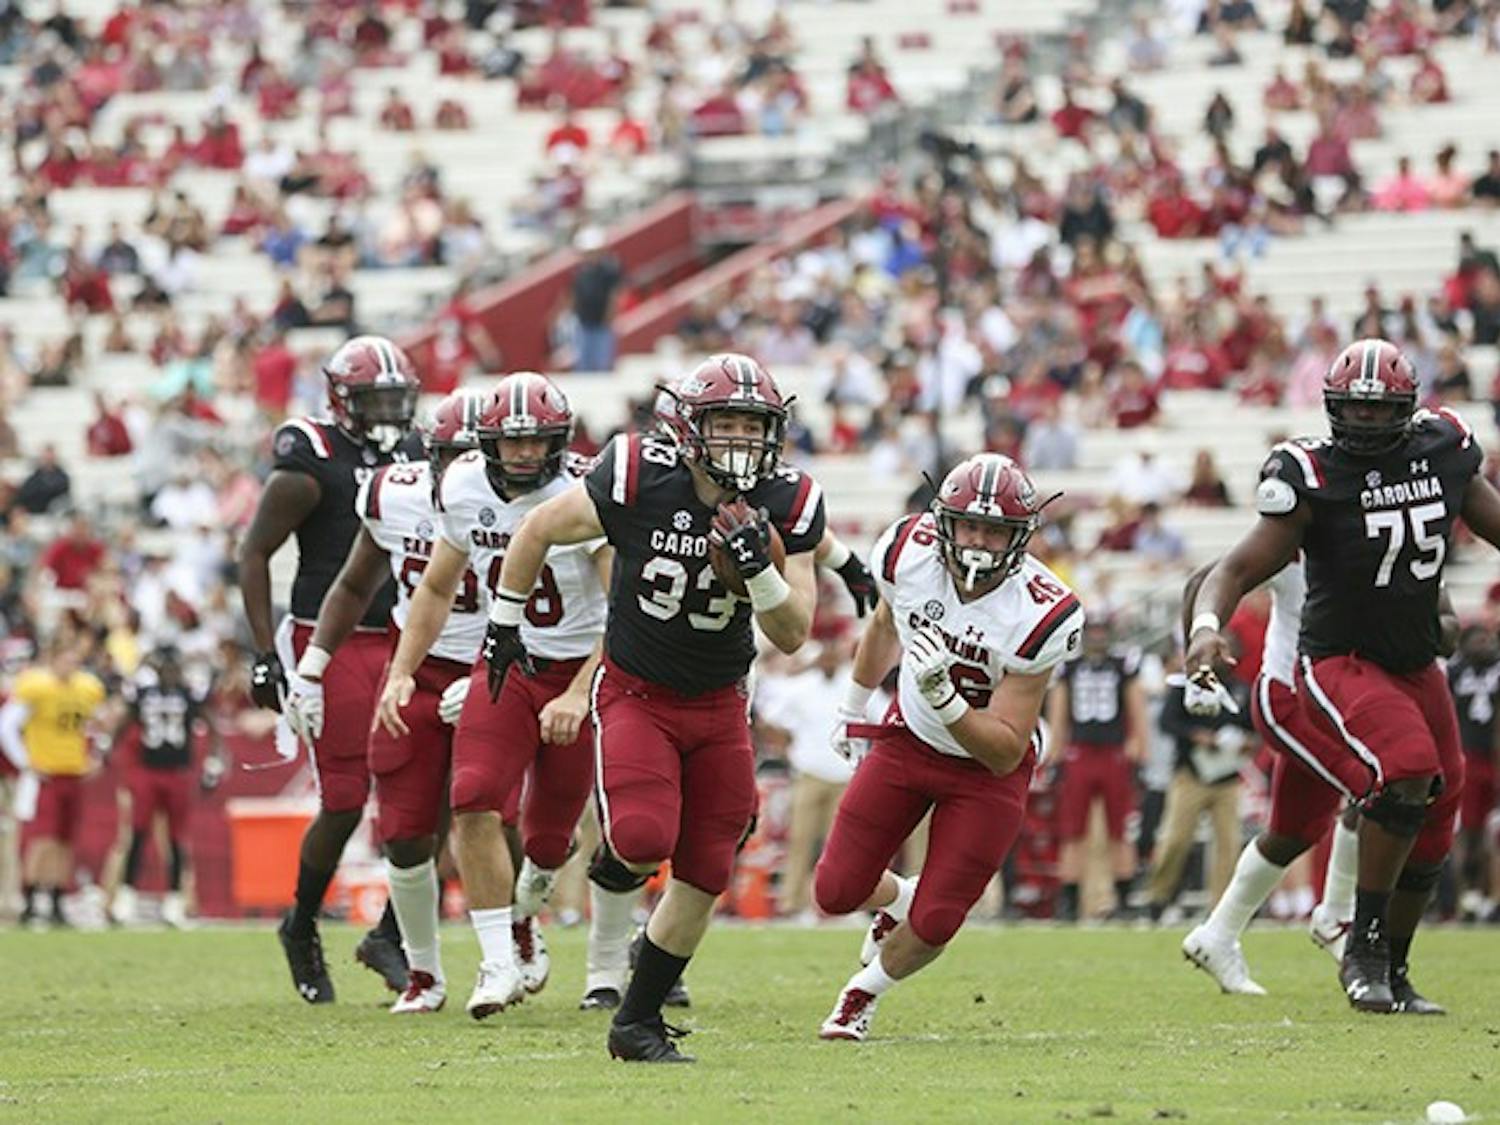 Redshirt junior Slade Carroll runs down the field to score a touchdown during the spring game at Williams-Brice Stadium on Saturday.&nbsp;